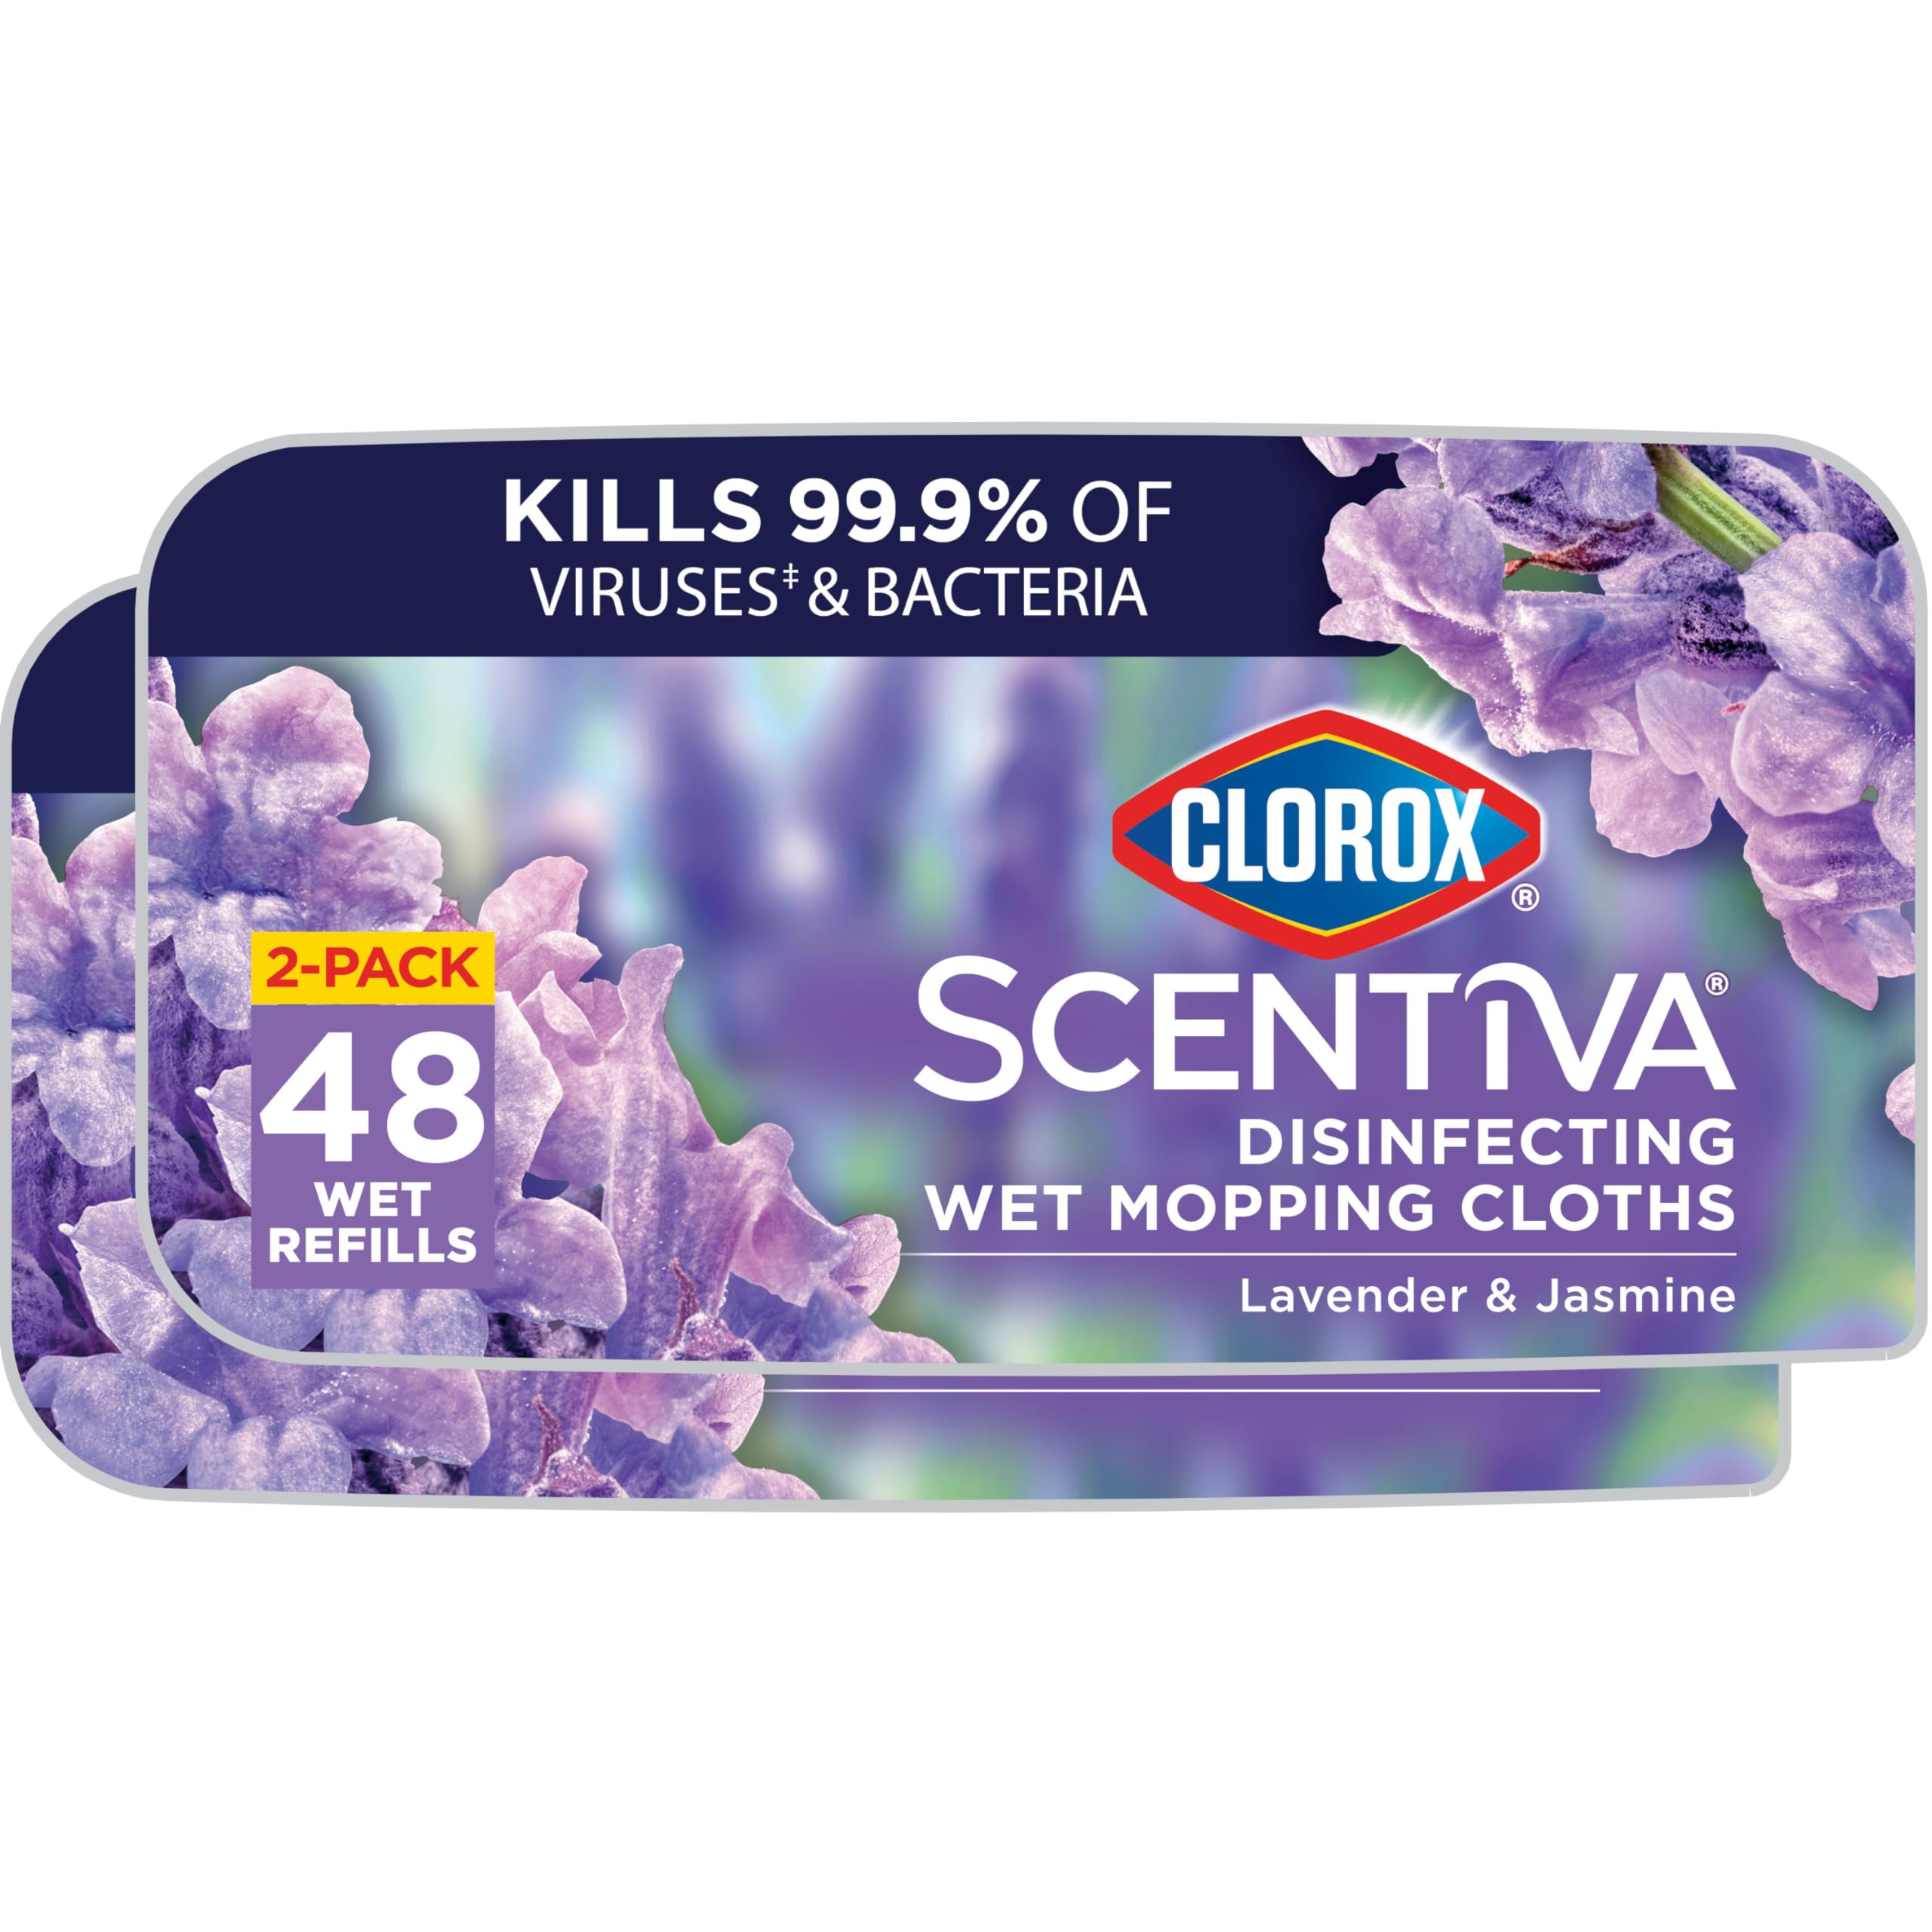 2-Pack 24-Count Clorox Scentiva Disinfecting Wet Mopping Pad Refills (Tuscan Lavender & Jasmine) $8.20 + Free Shipping w/ Prime or on $35+